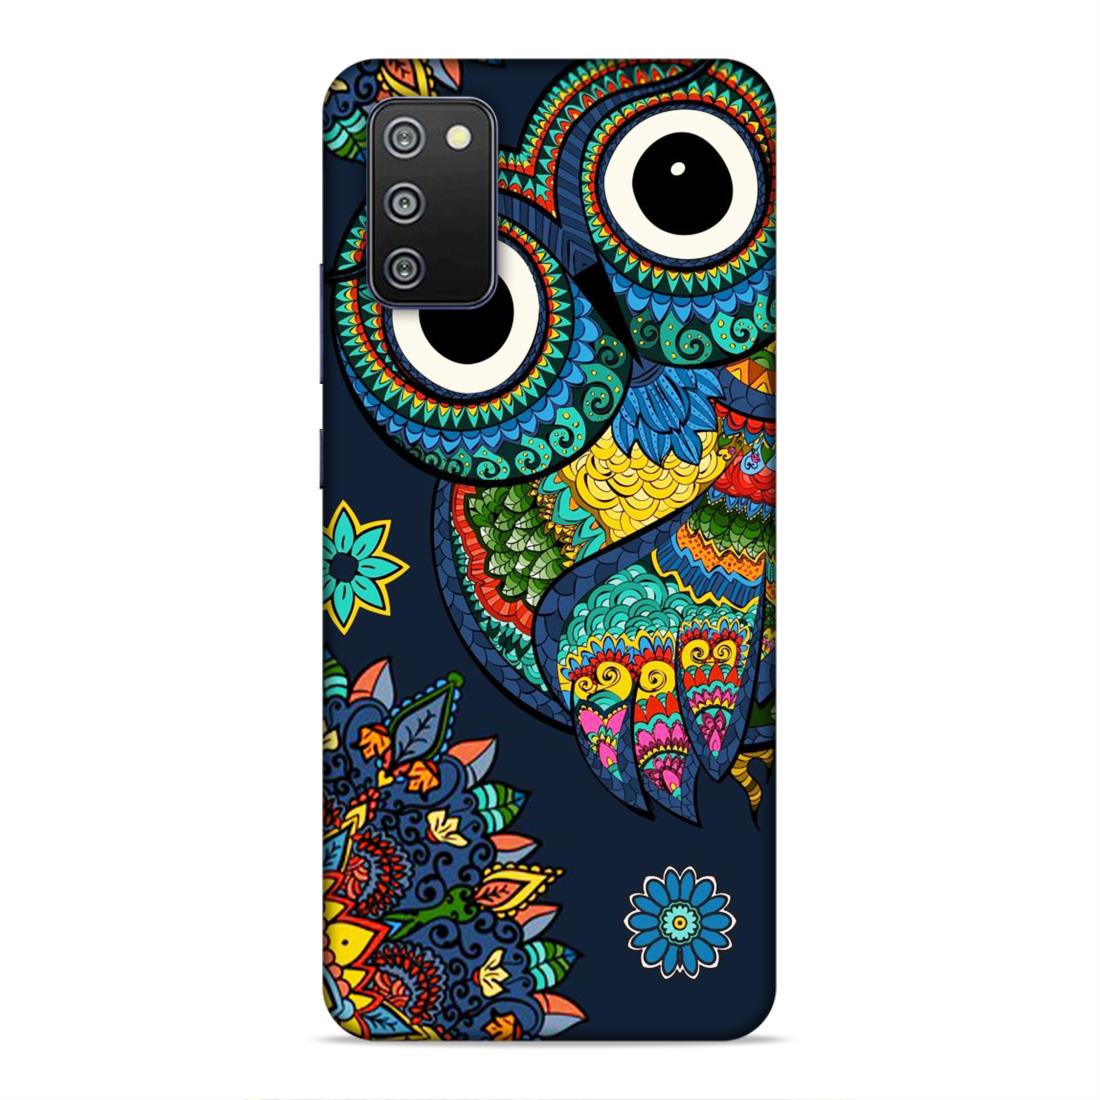 Owl and Mandala Flower Hard Back Case For Samsung Galaxy A03s / F02s / M02s